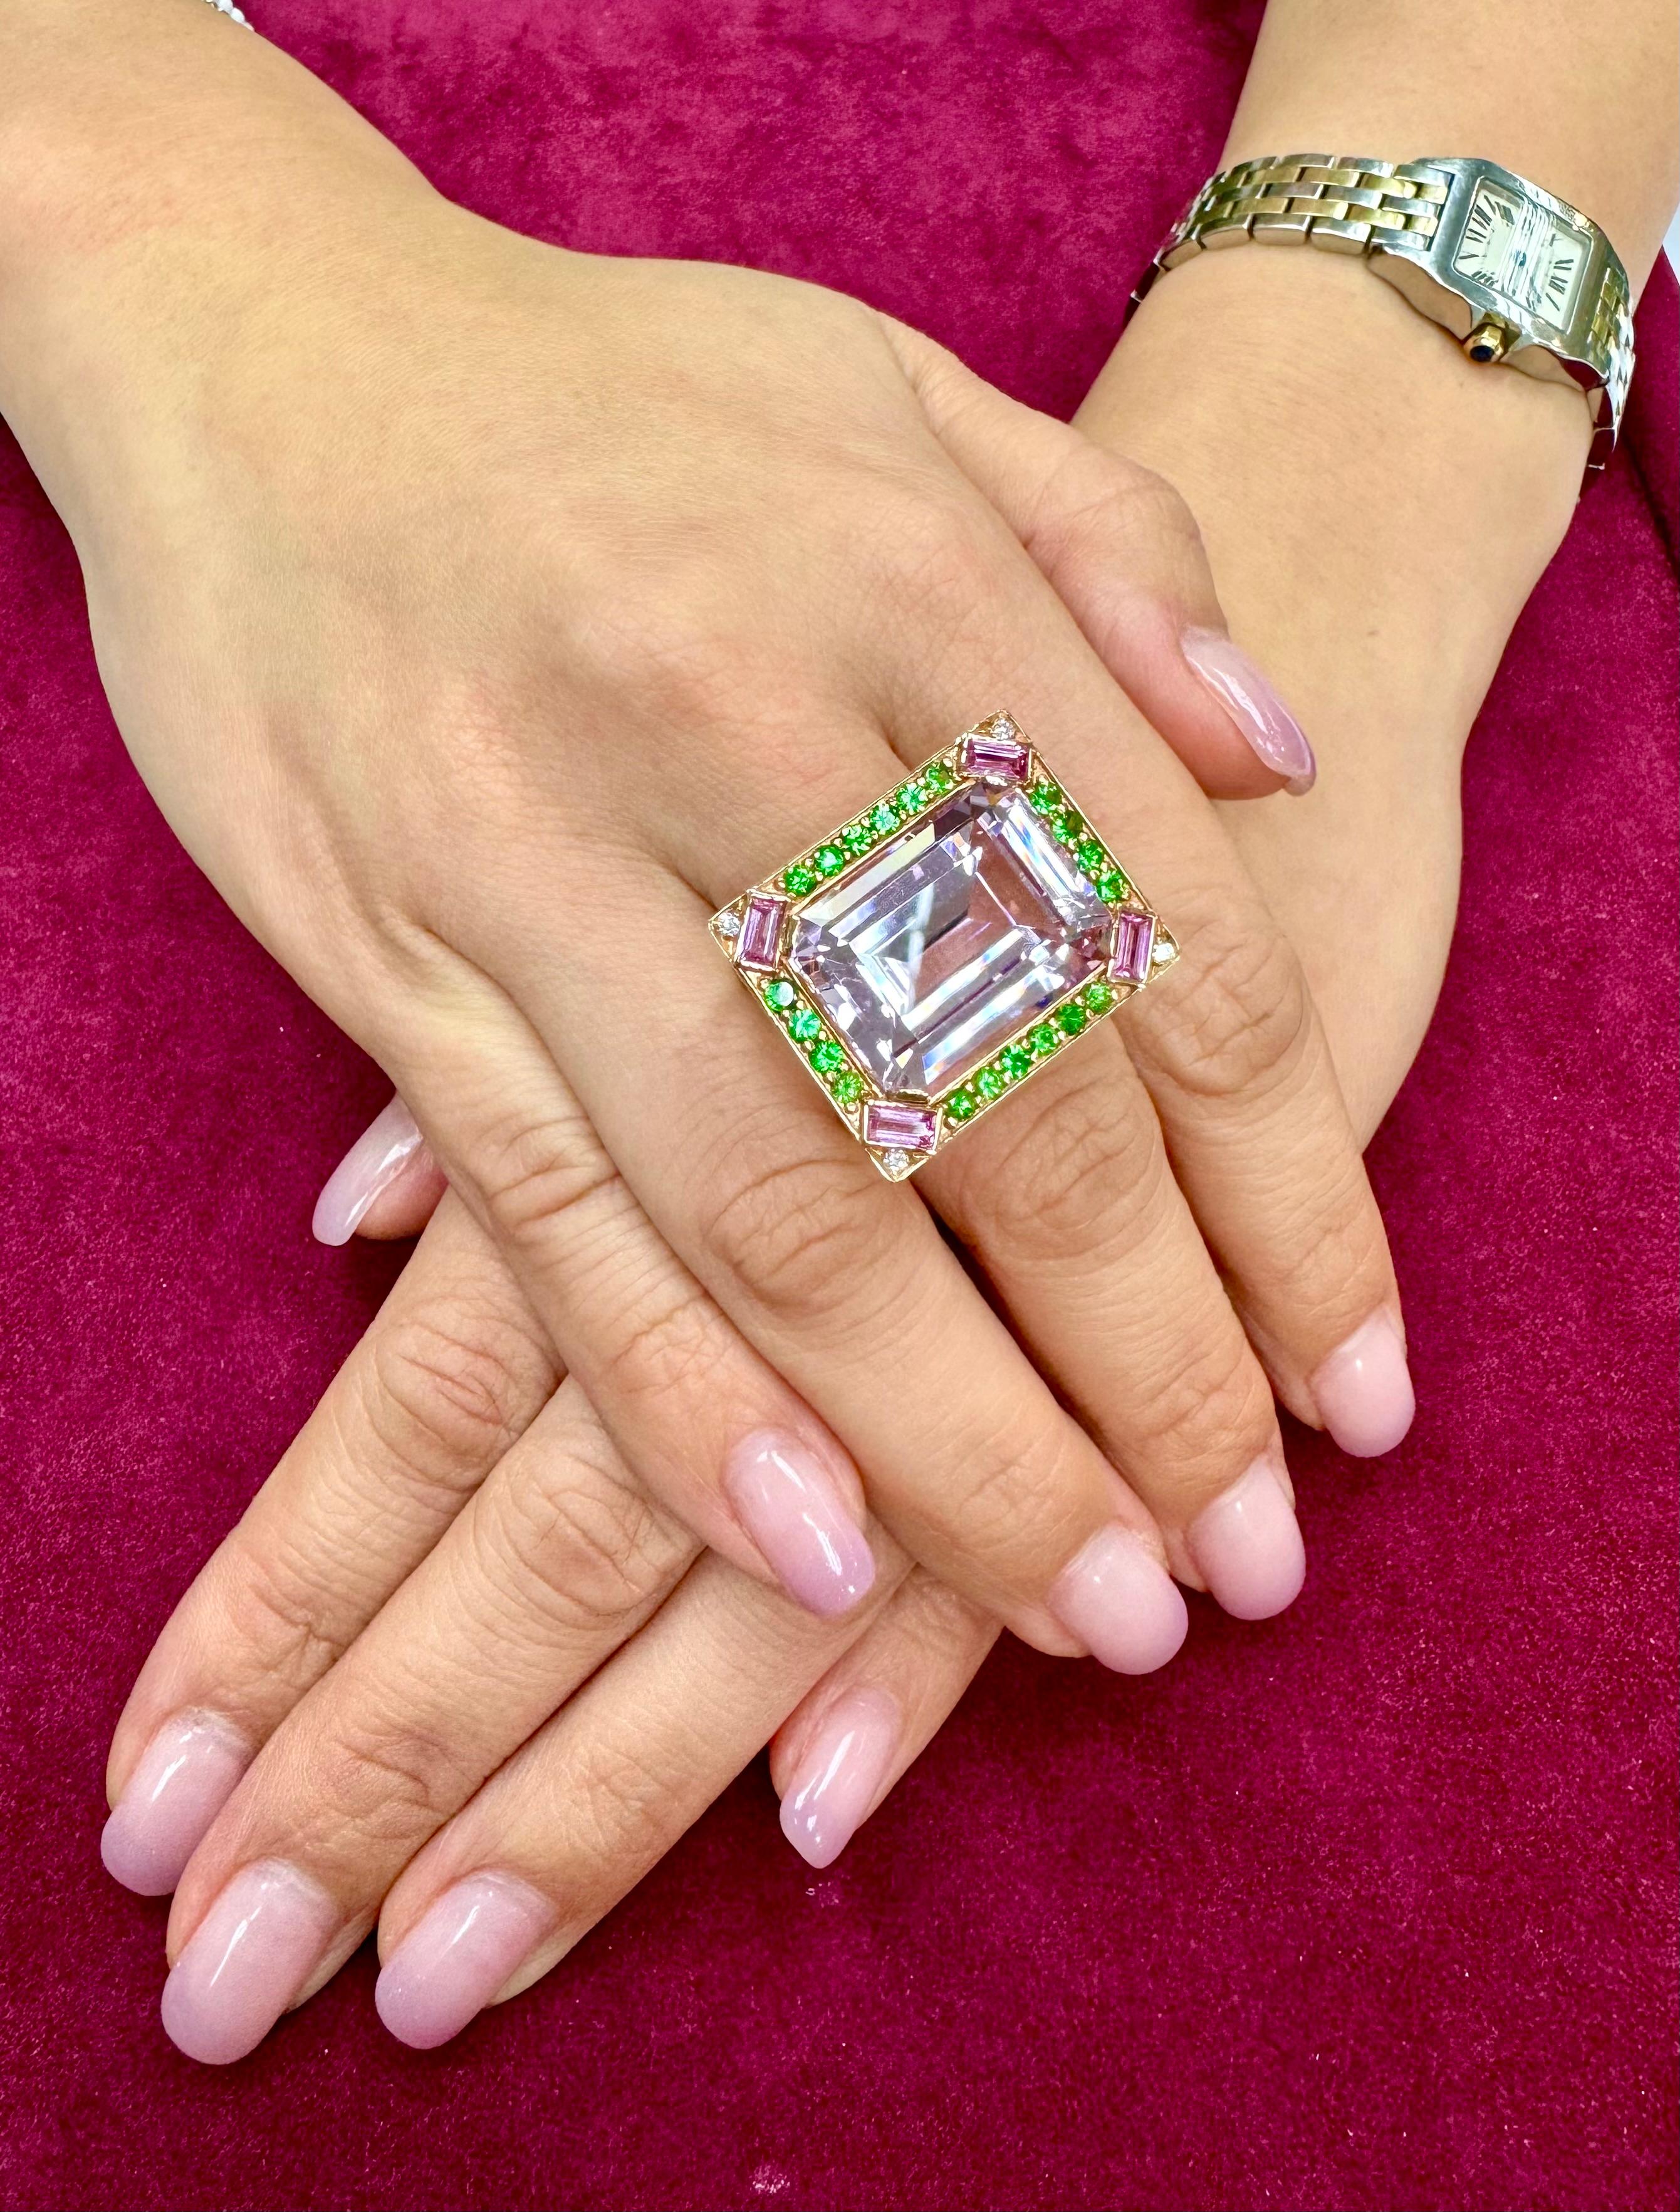 Please check out the HD video! Extra extra large ultra Morden design. If you want a statement piece, this is it!  The XXL kunzite has a very nice pink! This cocktail ring will get you tons of compliments. Oversized at 26.74cts. The ring is set  with